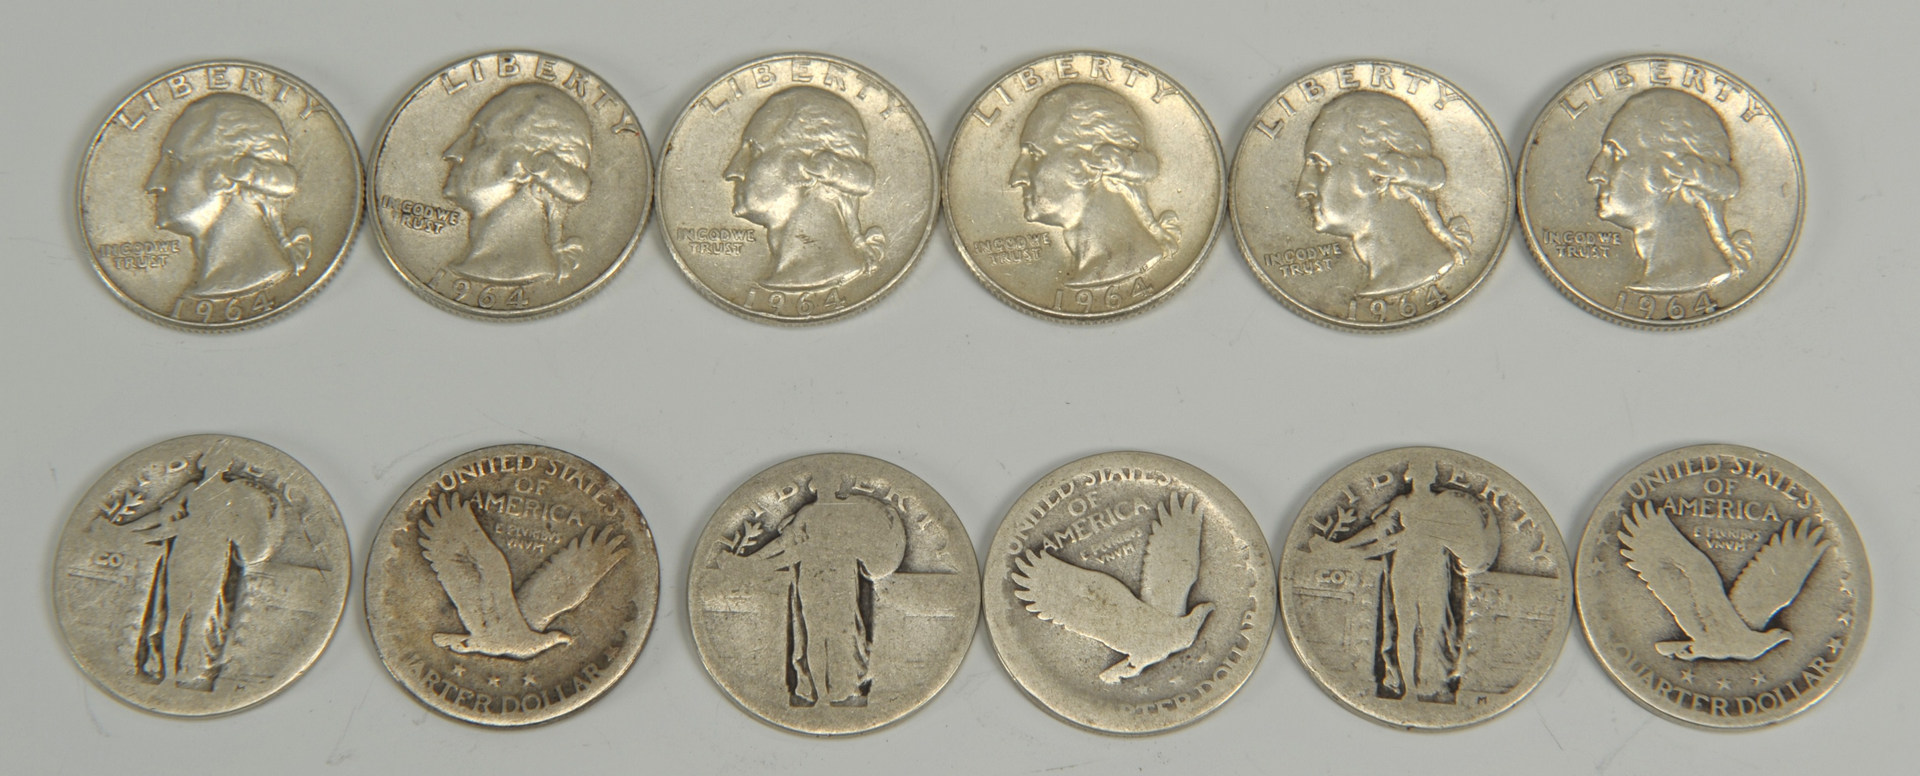 Lot 549: Grouping of U.S. Silver Quarters